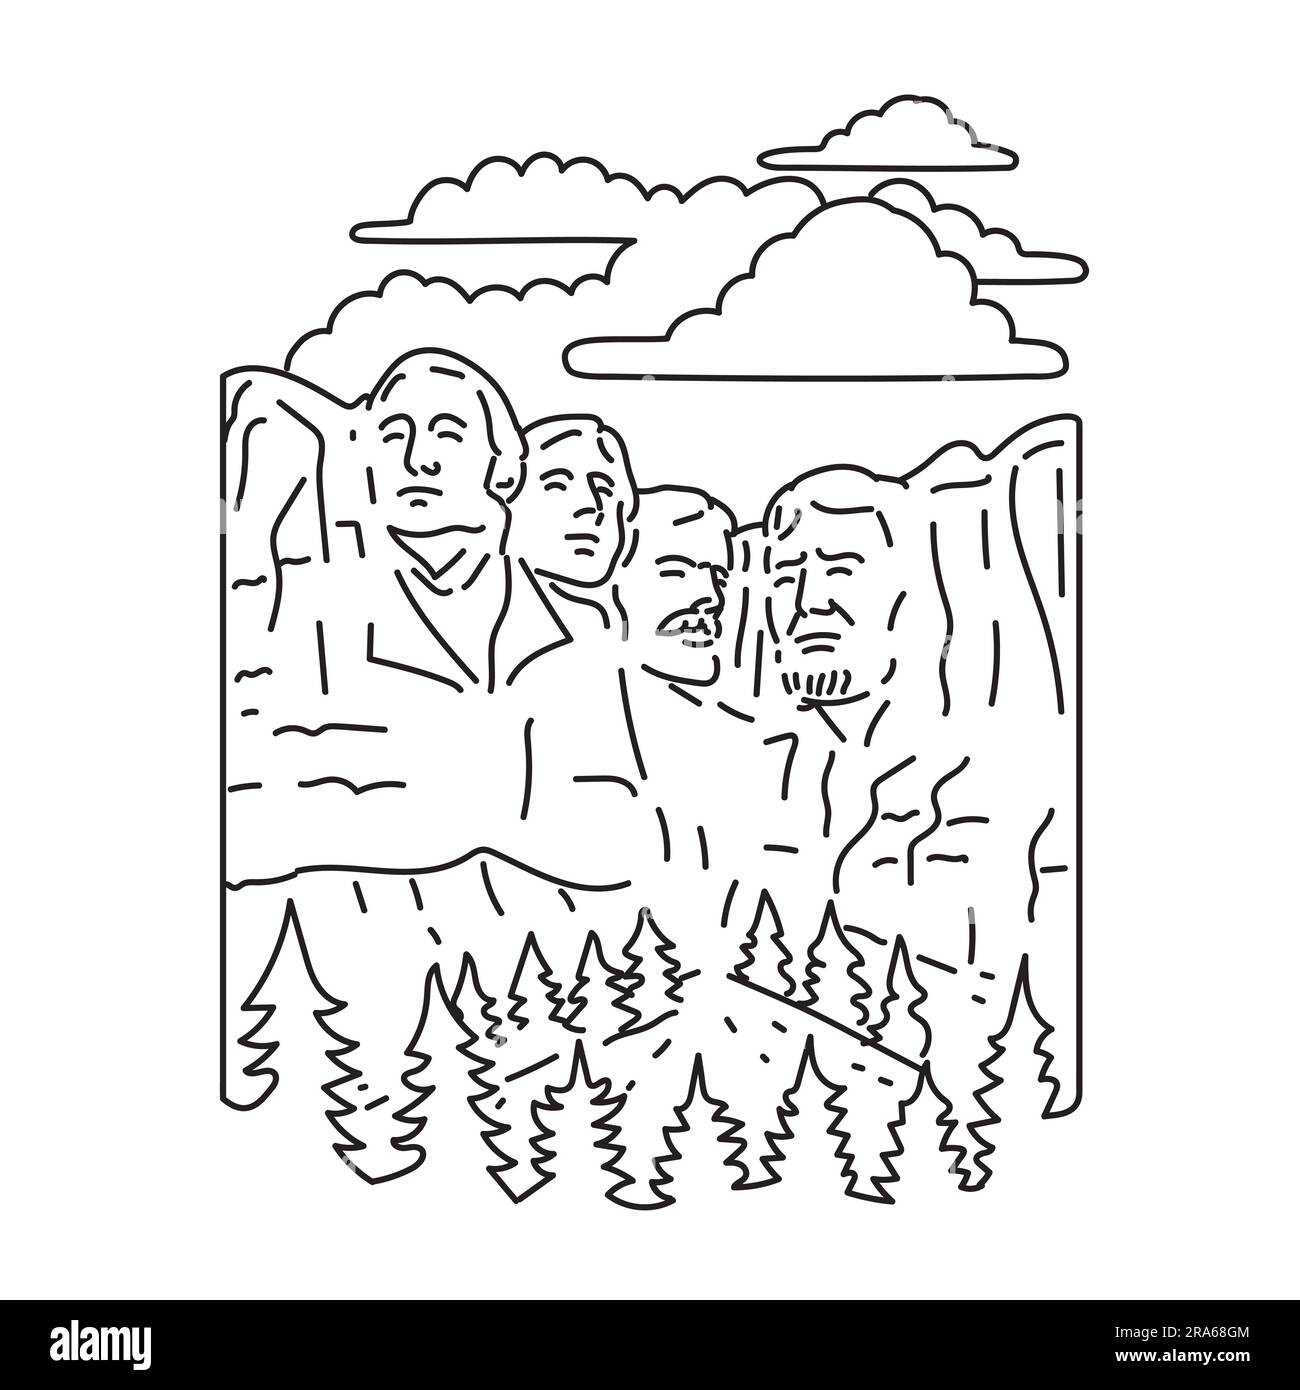 Mono line illustration of Mount Rushmore National Memorial with colossal sculpture called Shrine of Democracy in Black Hills near Keystone, South Dako Stock Photo